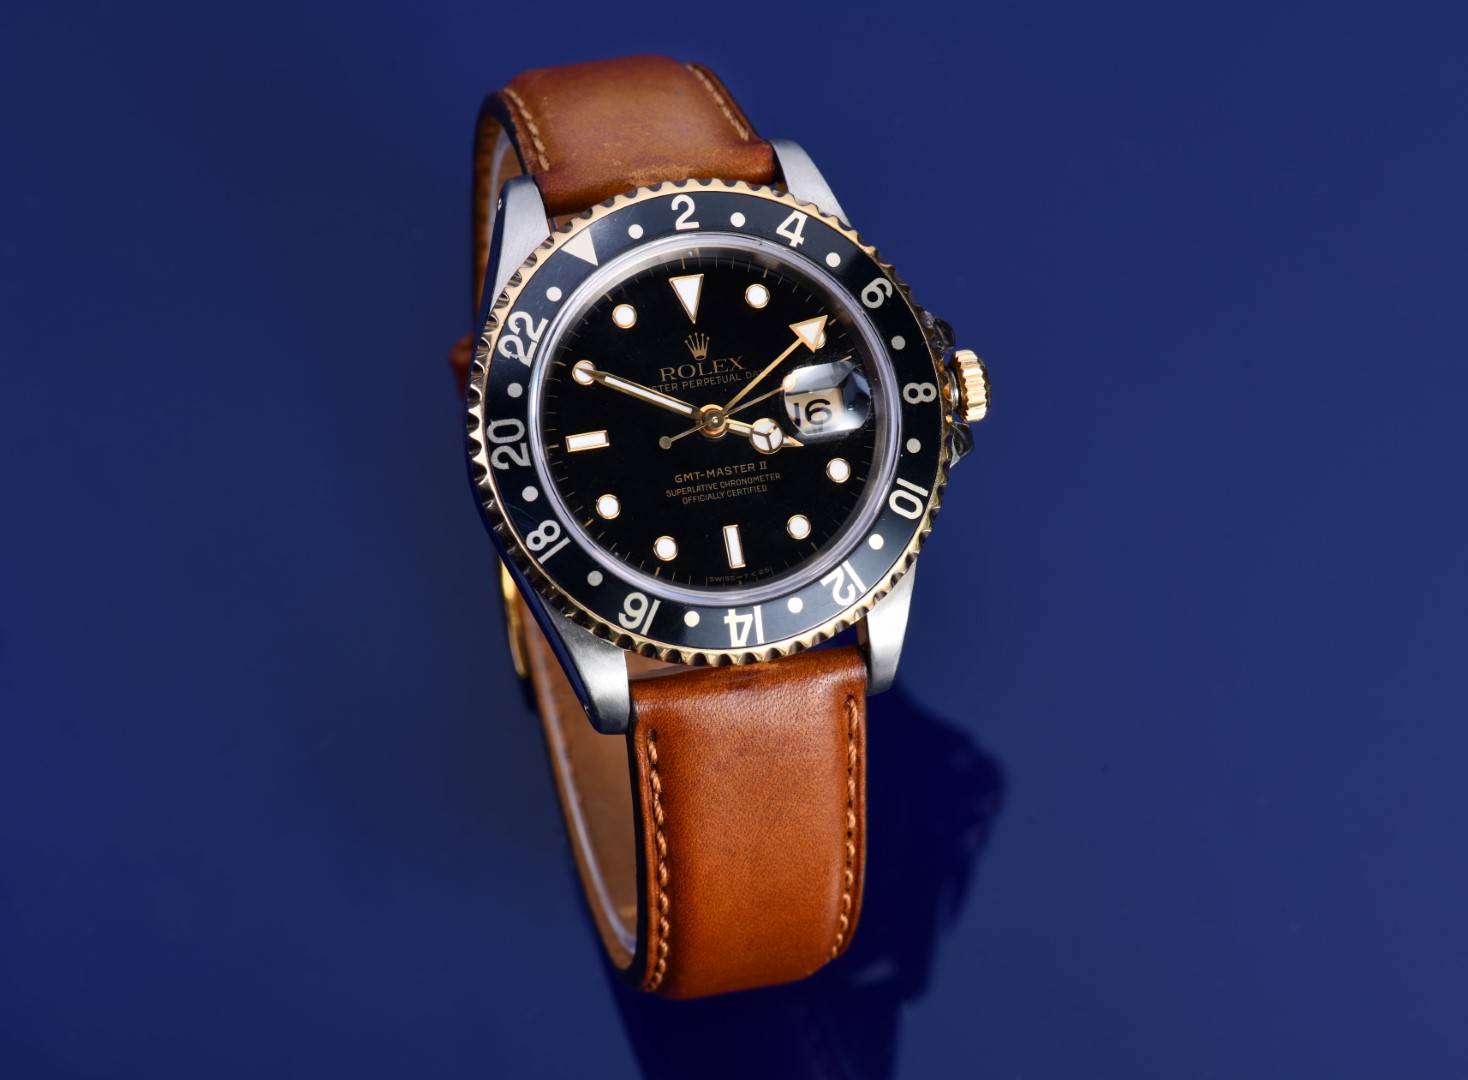 Rolex Oyster Perpetual Date GMT Master II gentleman's automatic wristwatch ref. 16713 with date